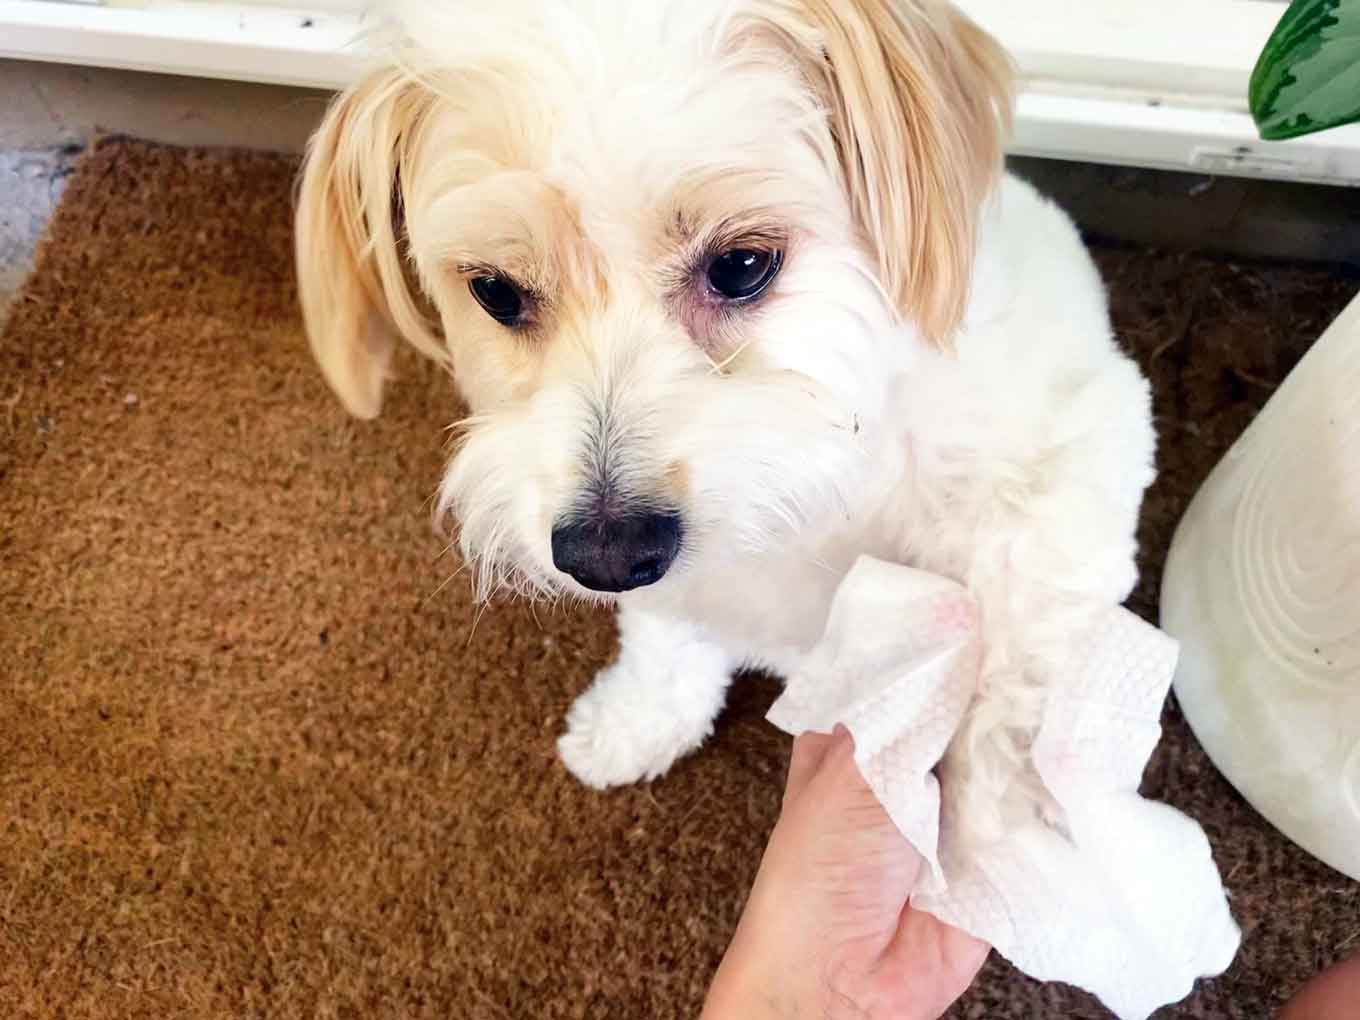 A white and tan dog gets her paws cleaned with wipes